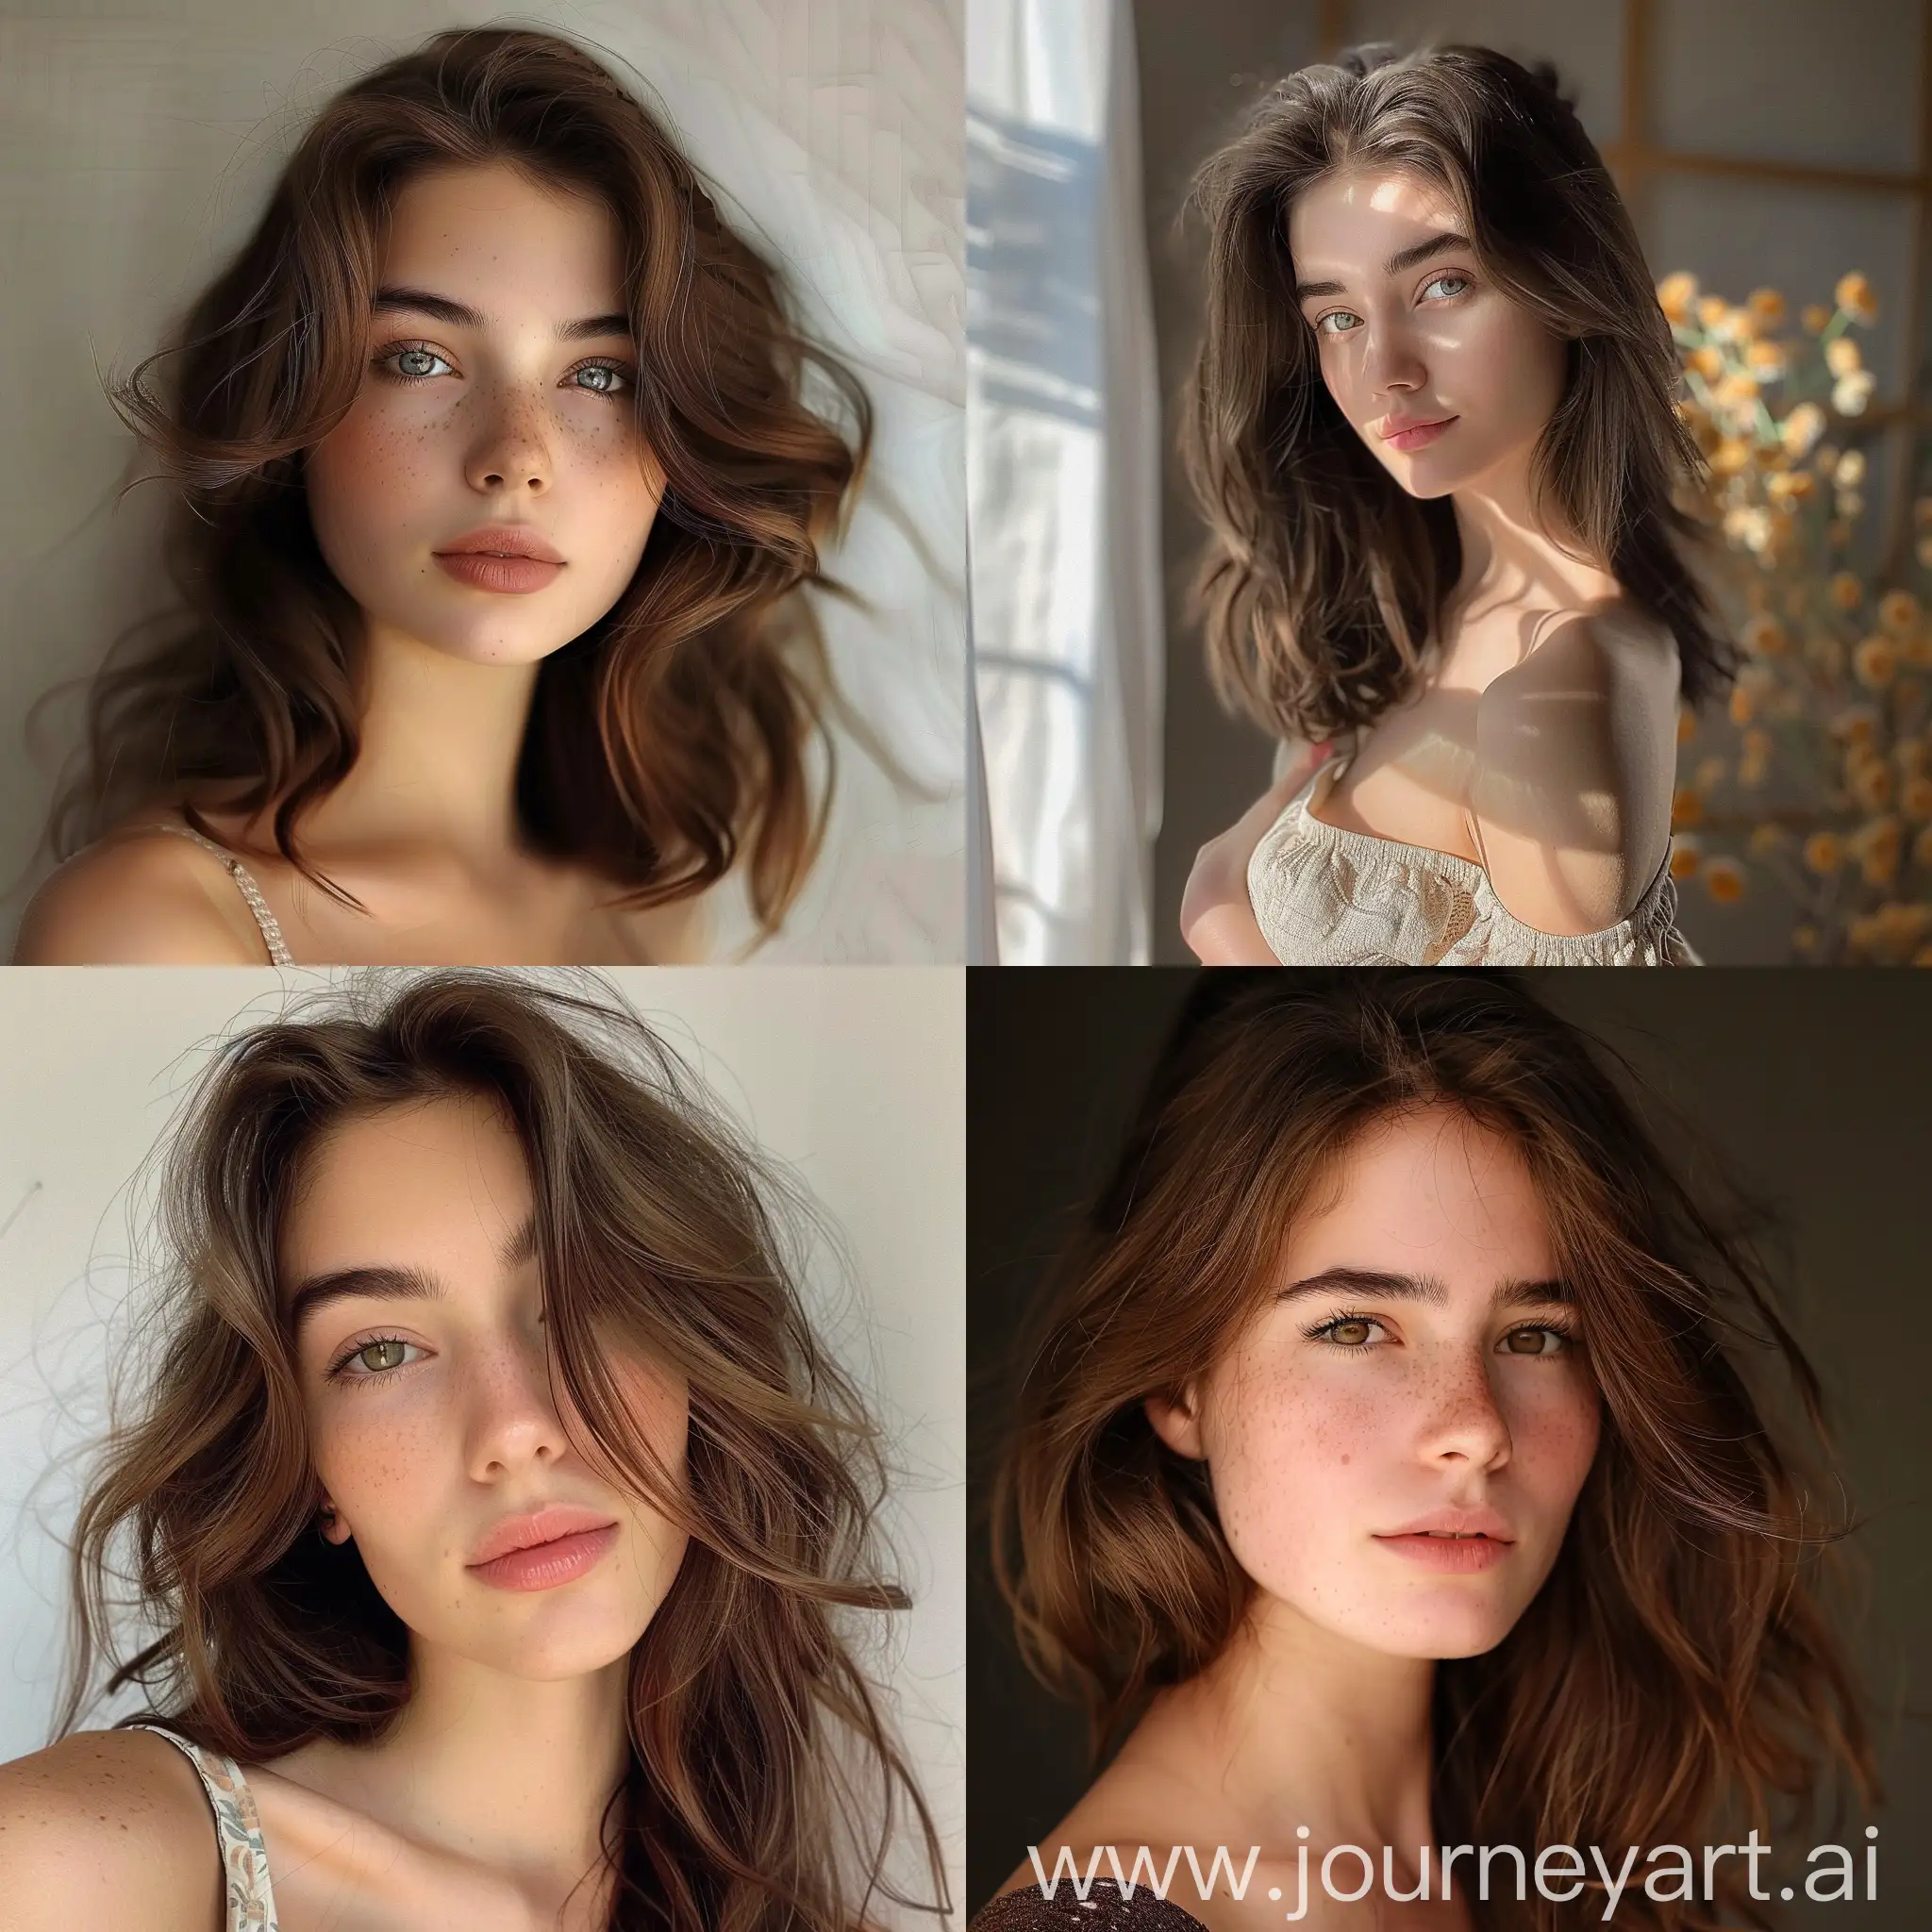 Elegant-Young-Woman-with-Brown-Hair-in-Natural-Beauty-Portrait